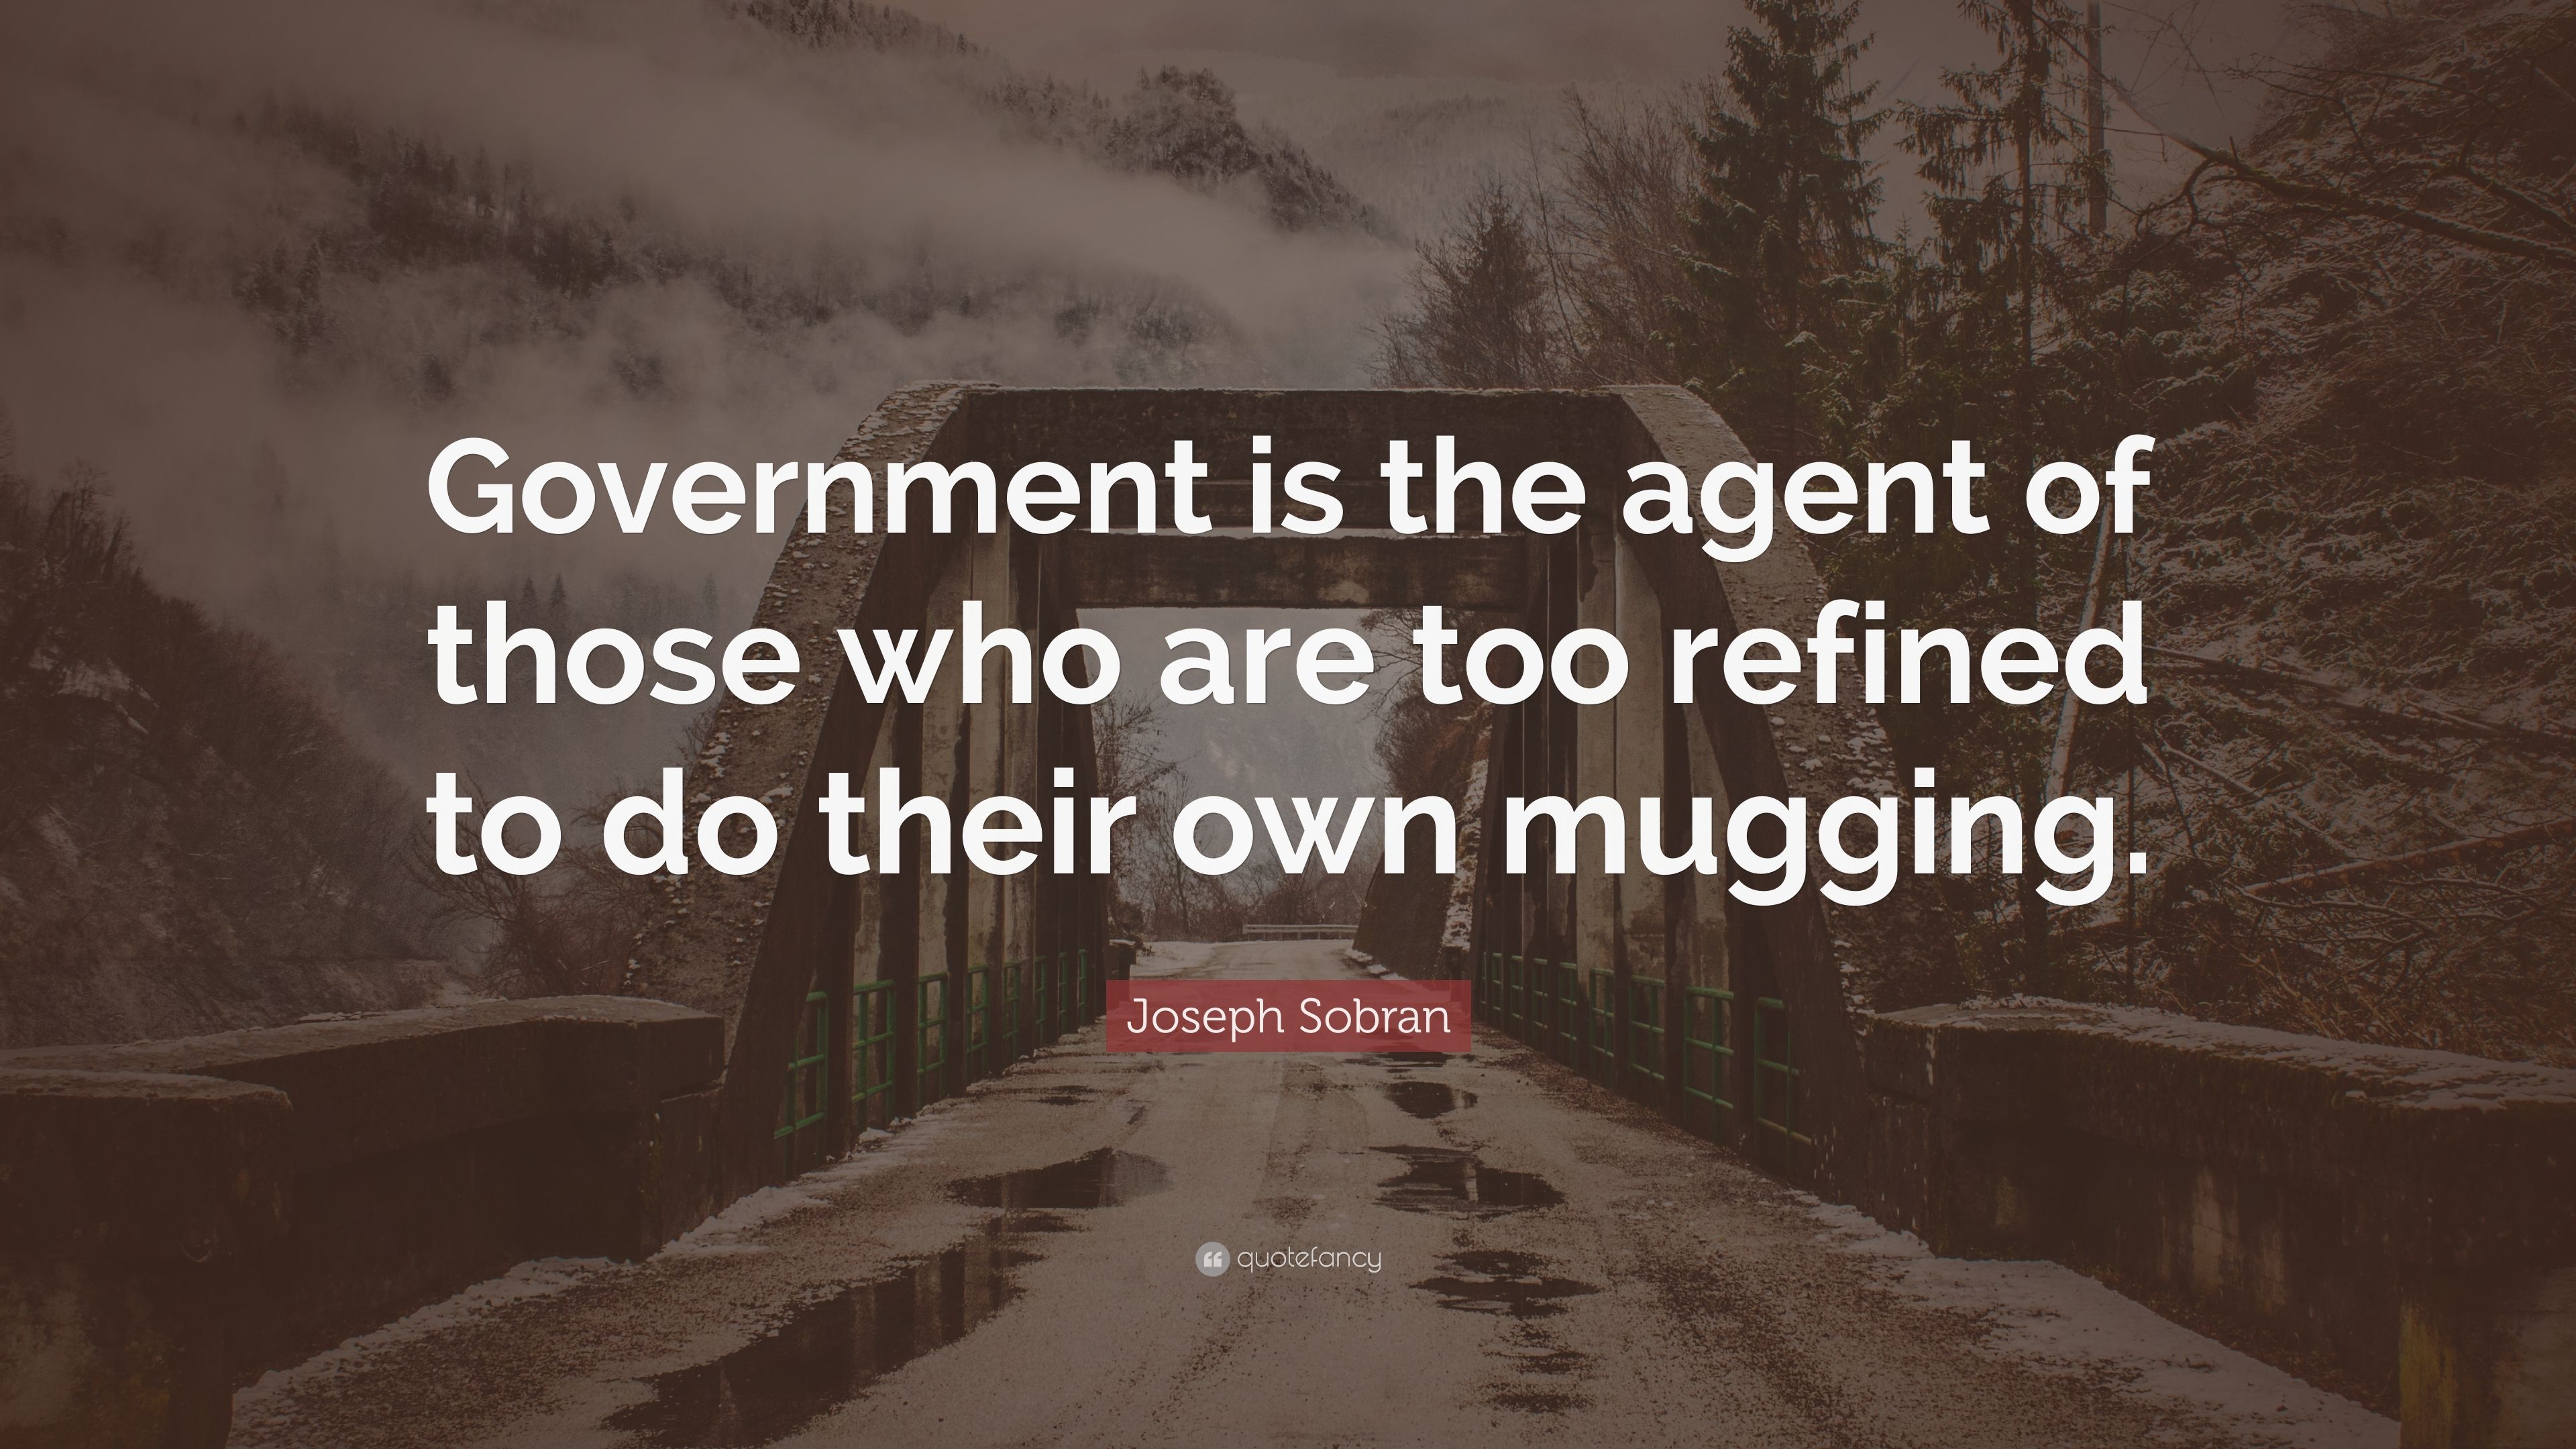 Joseph Sobran Quote: “Government is the agent of those who are too refined to do their own mugging.” (7 wallpaper)